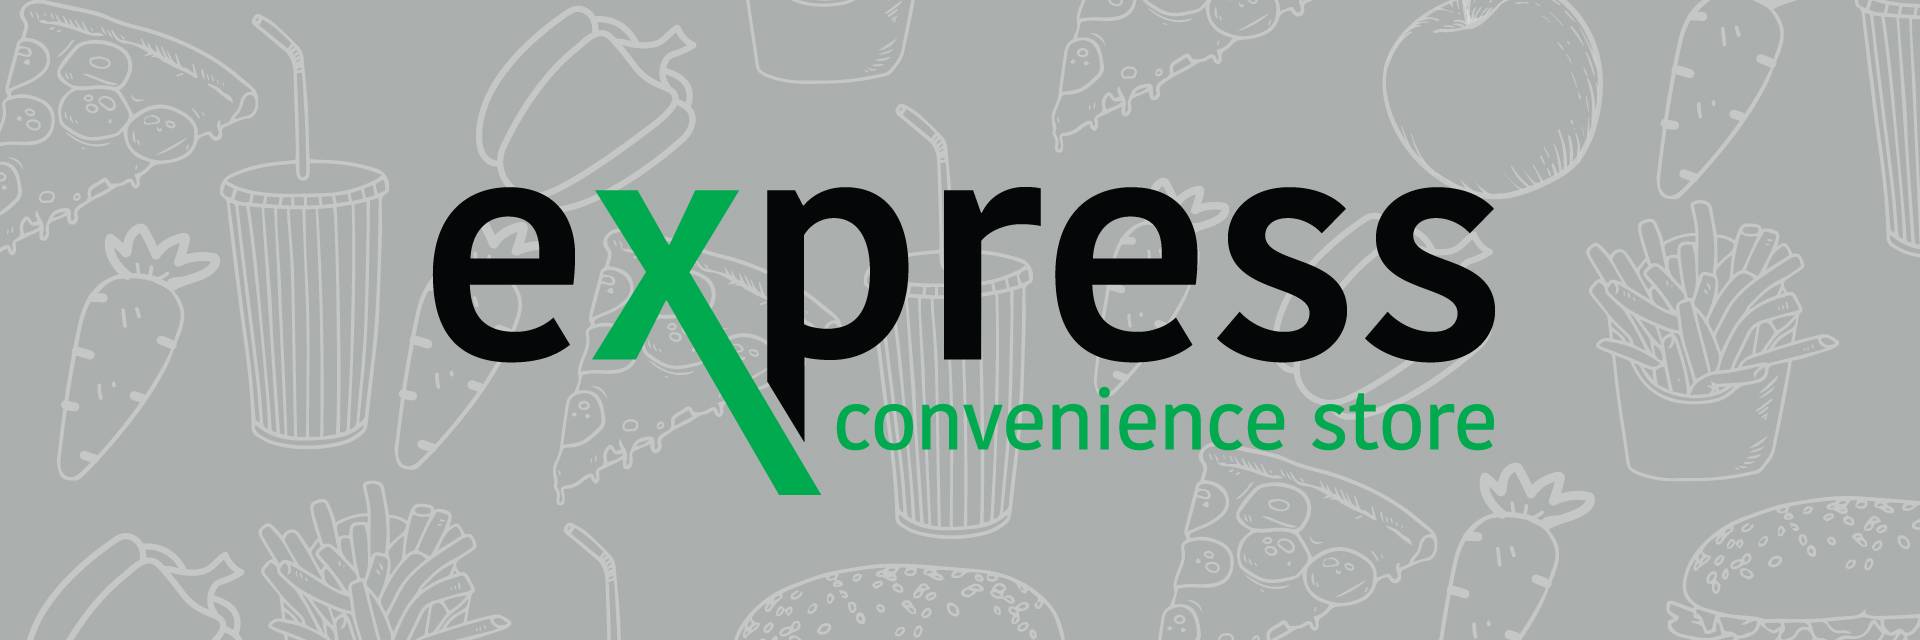 express convenience store logo with food illustrations behind it